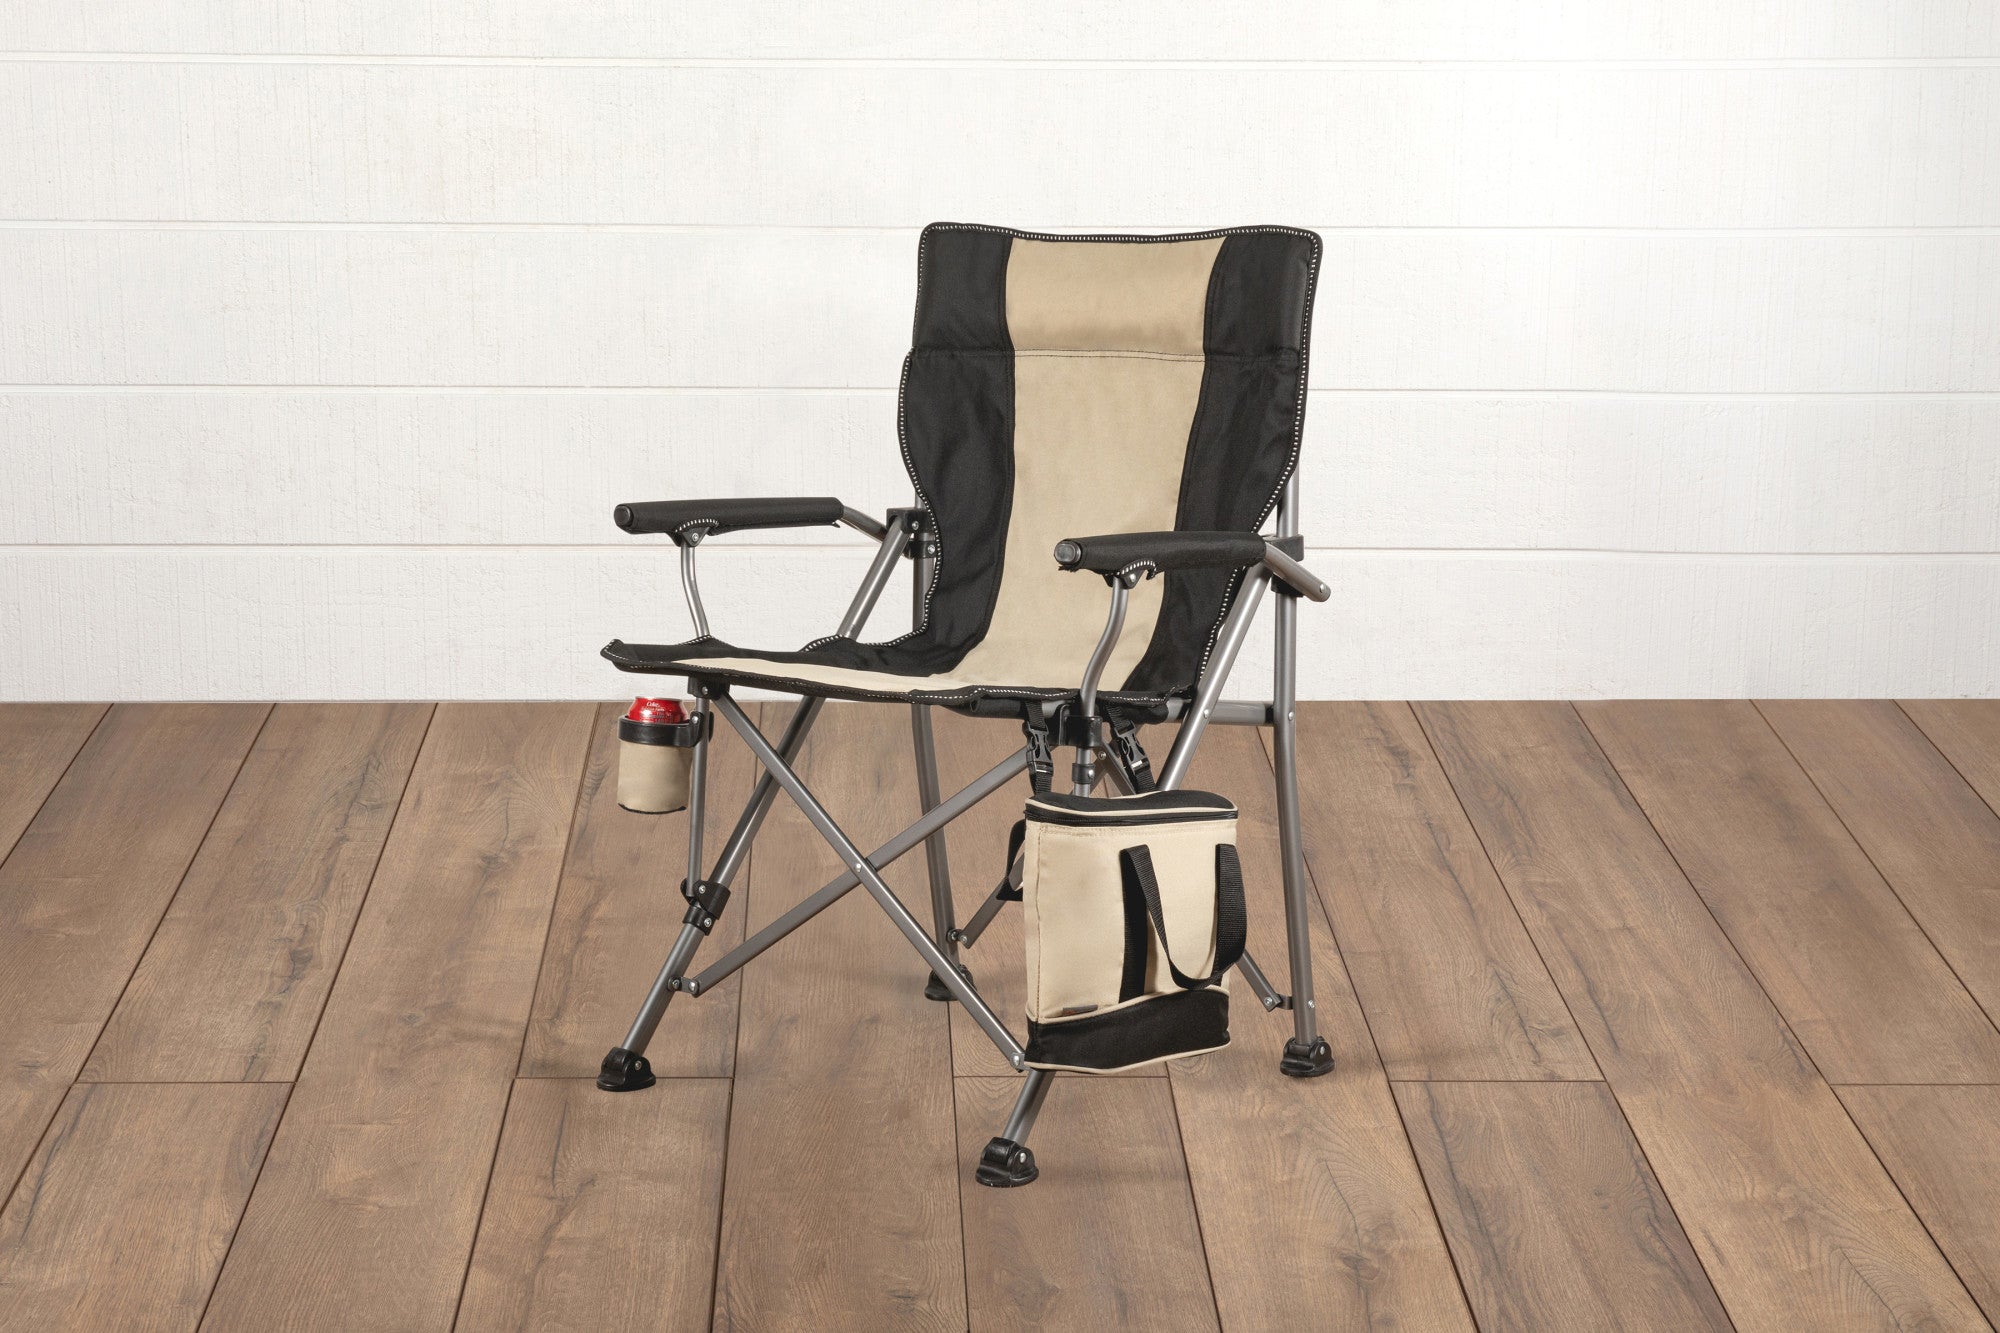 Minnesota Vikings - Outlander XL Camping Chair with Cooler